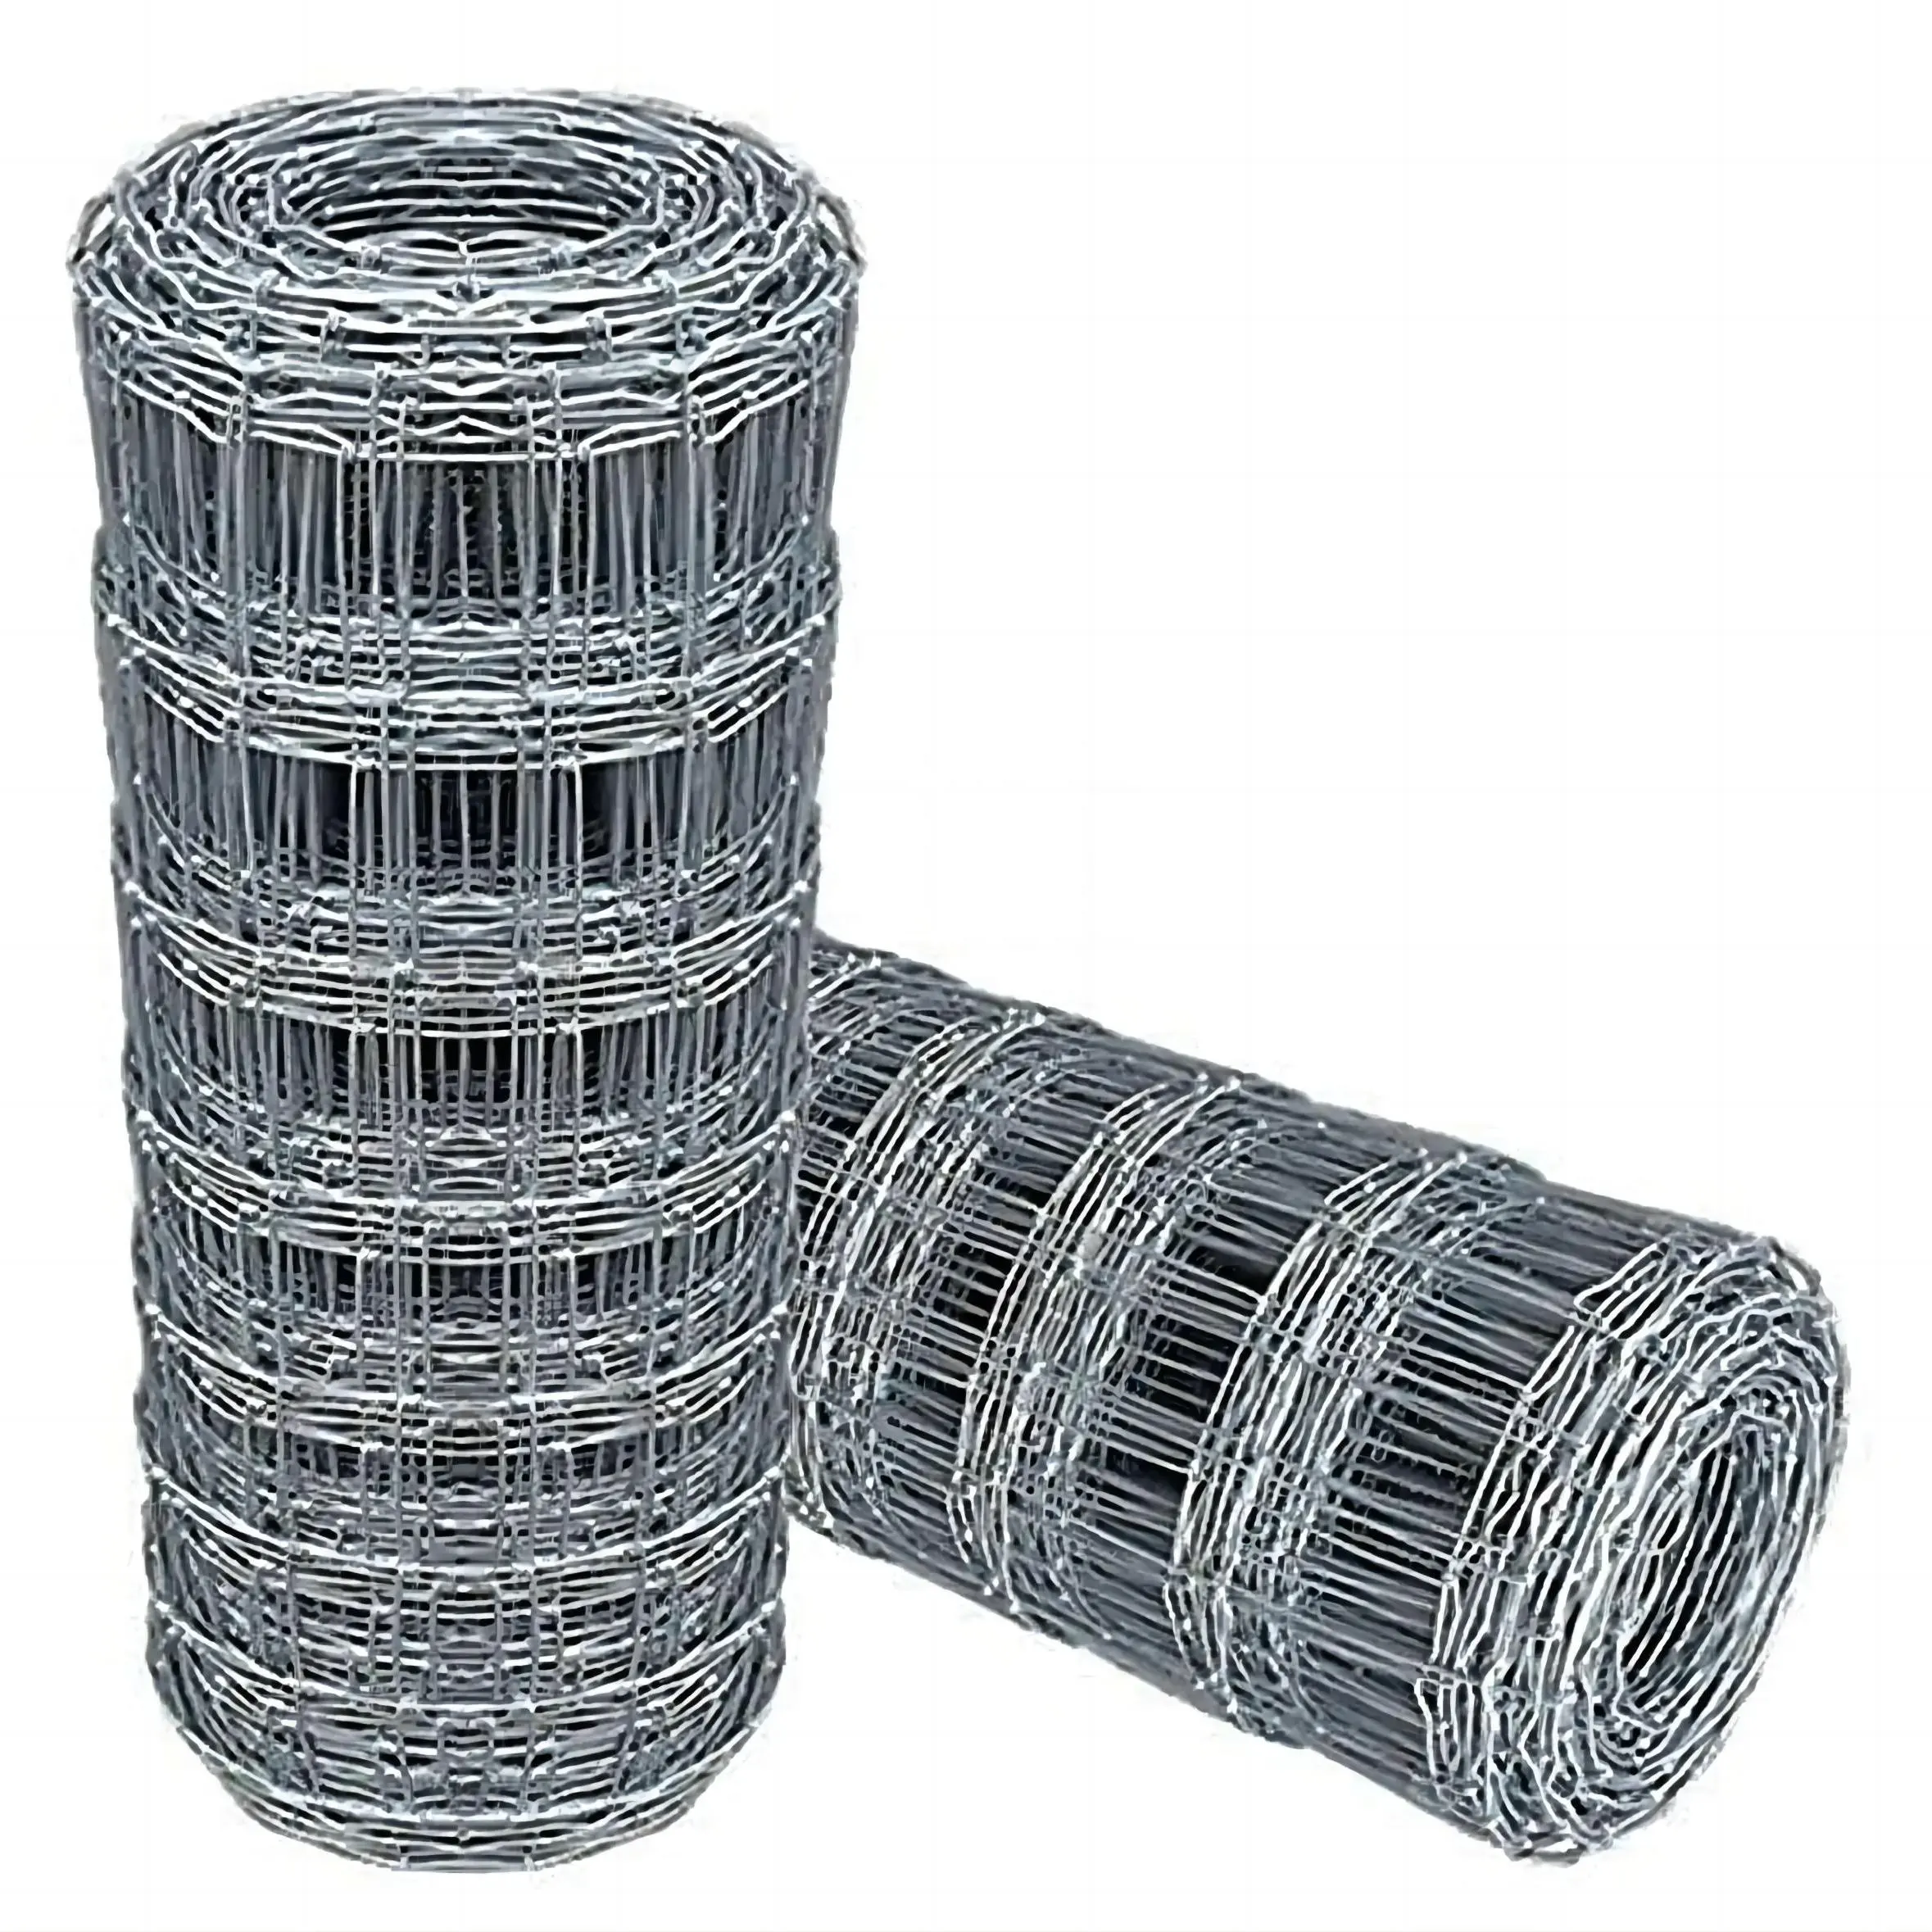 Wholesale galvanized cattle wire mesh fence goat sheep hog game wire deer farm fence field grassland fencing for goat